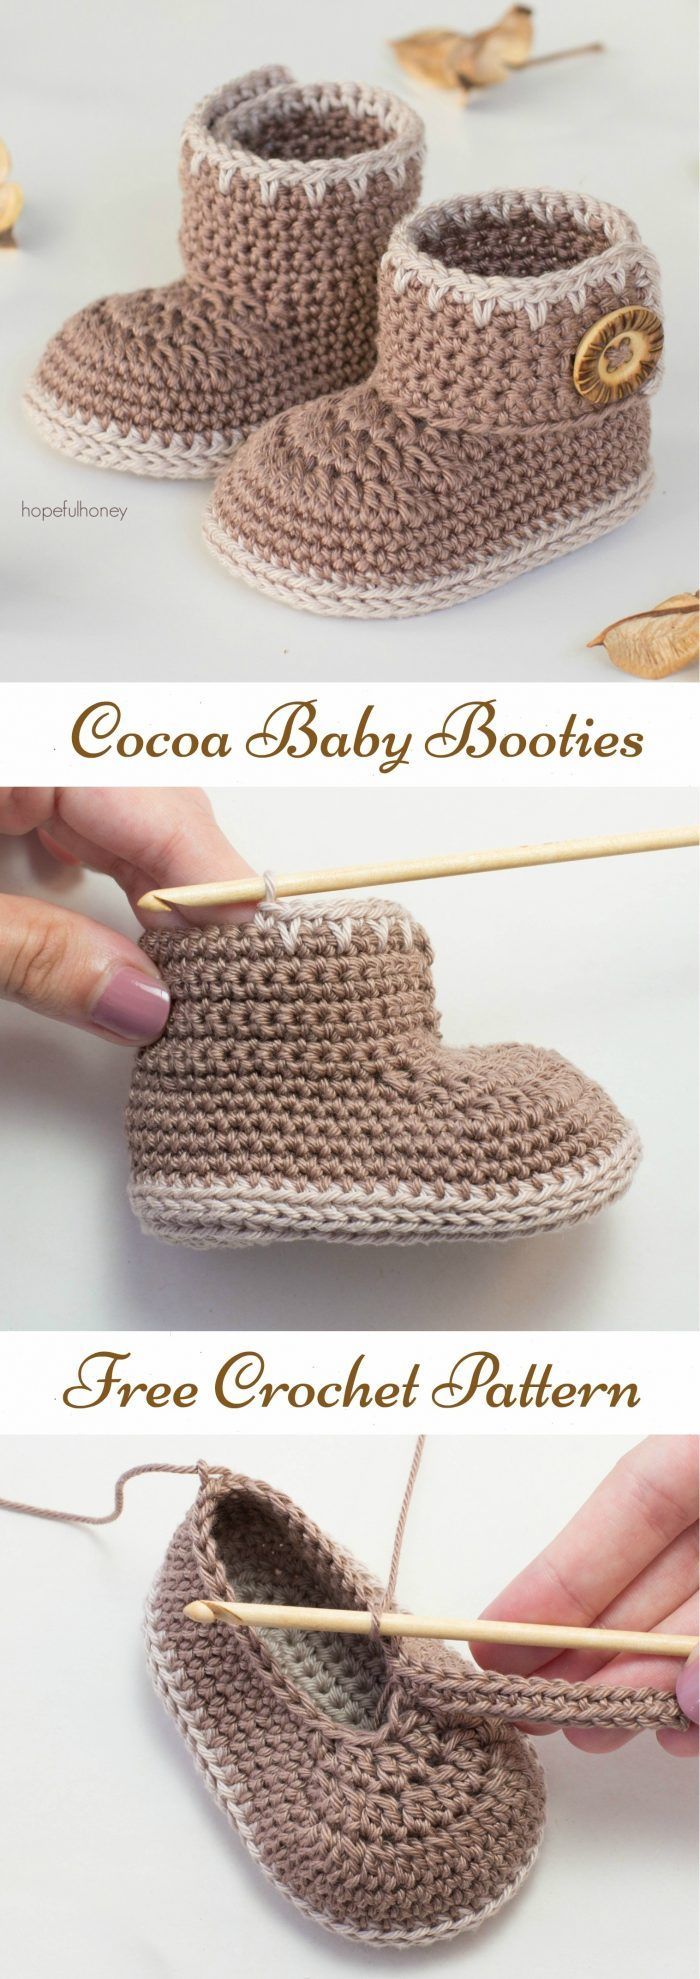 Cocoa Baby Booties Free Crochet Pattern - Crochet and Knitting Patterns